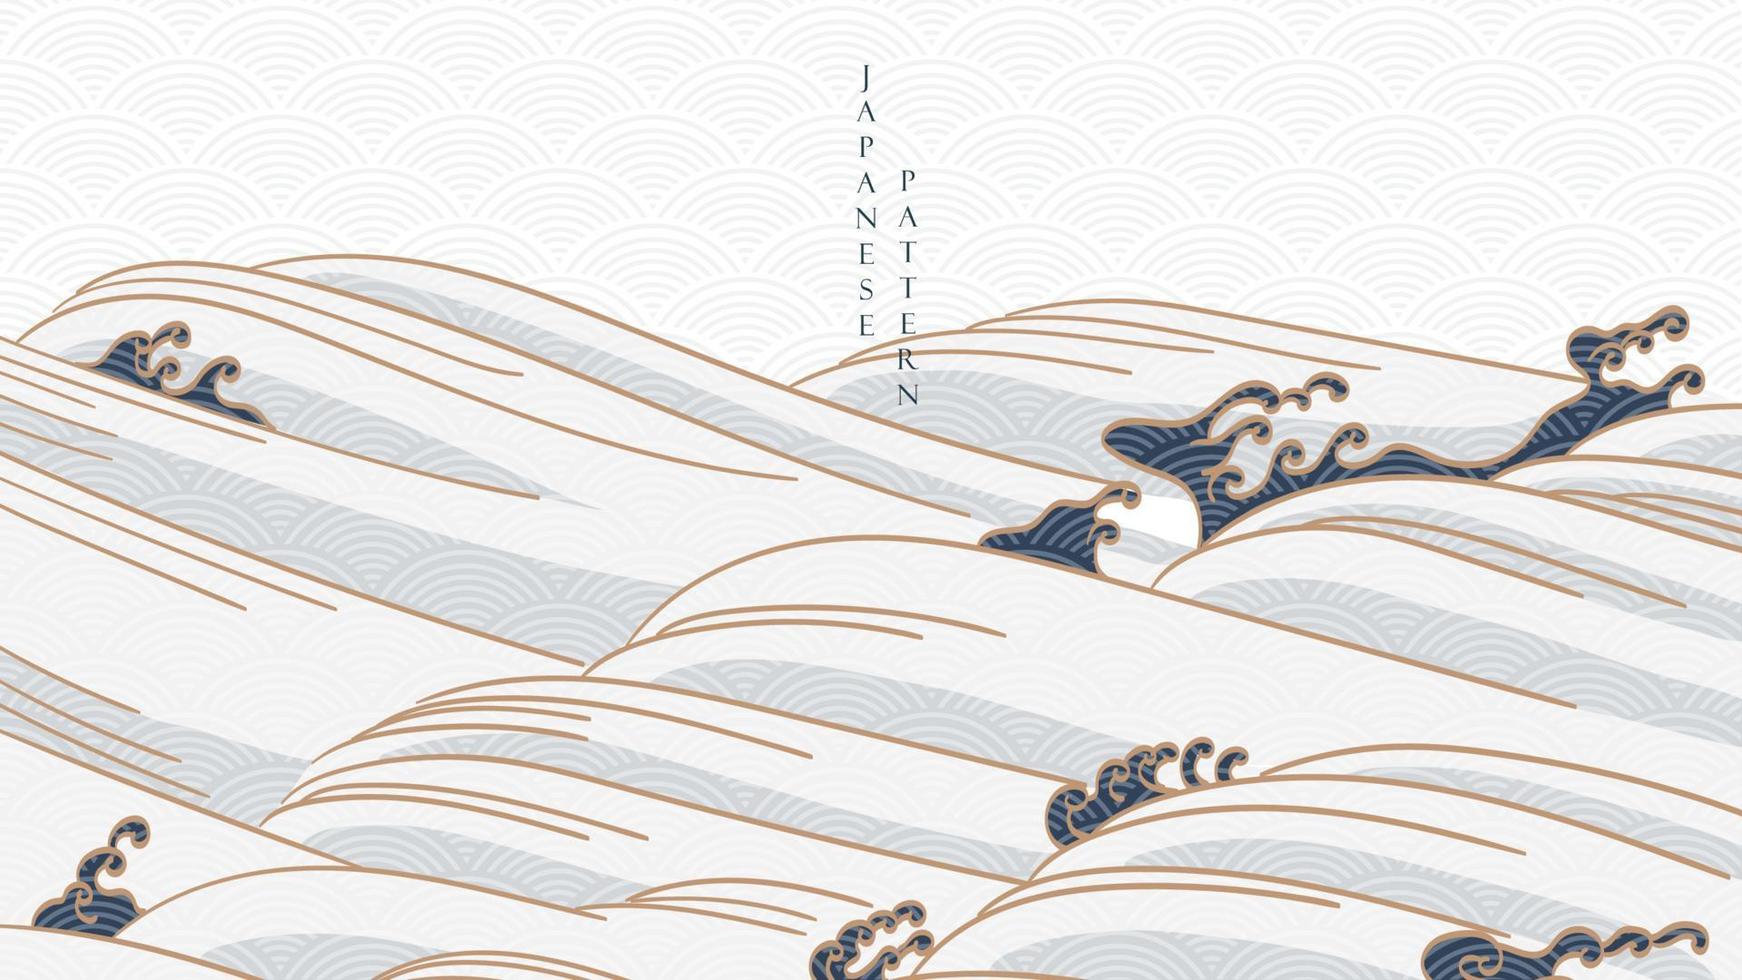 Japanese background with hand drawn wave pattern vector. Oriental ocean sea banner design with abstract art elements in vintage style. vector